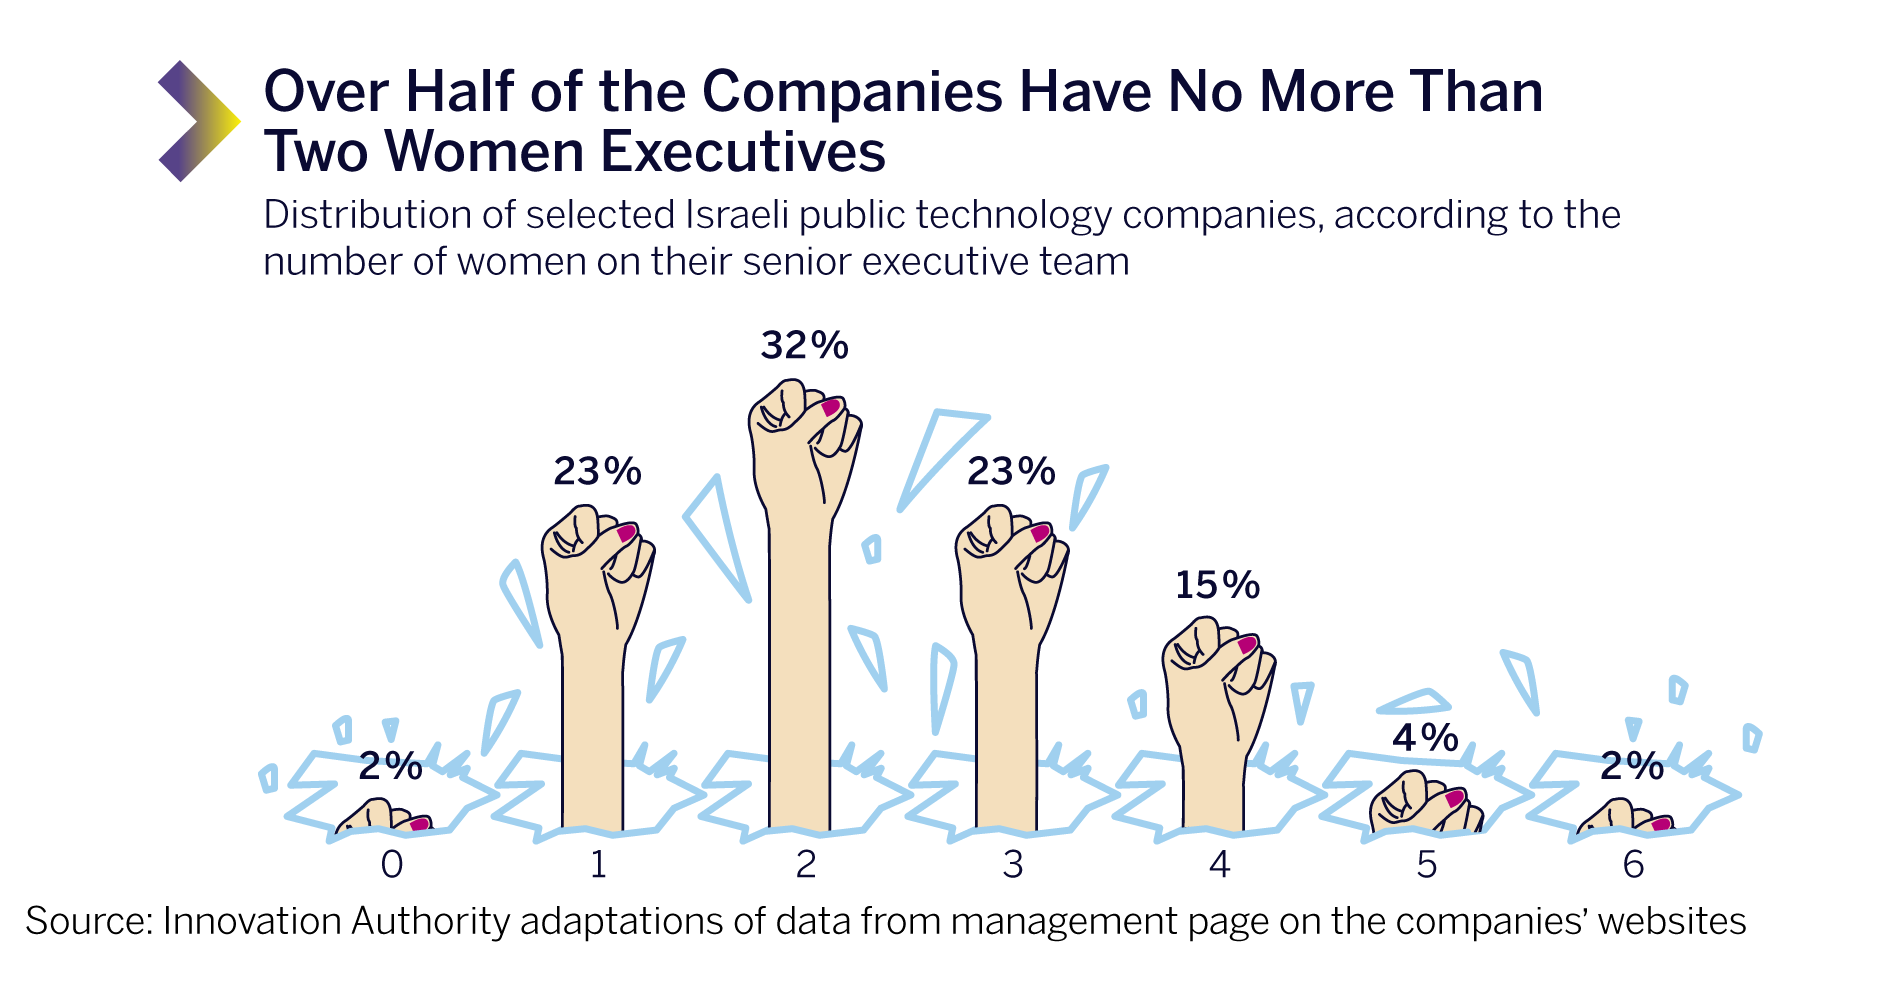 Over Half of the Companies Have No More Than Two Women Executives